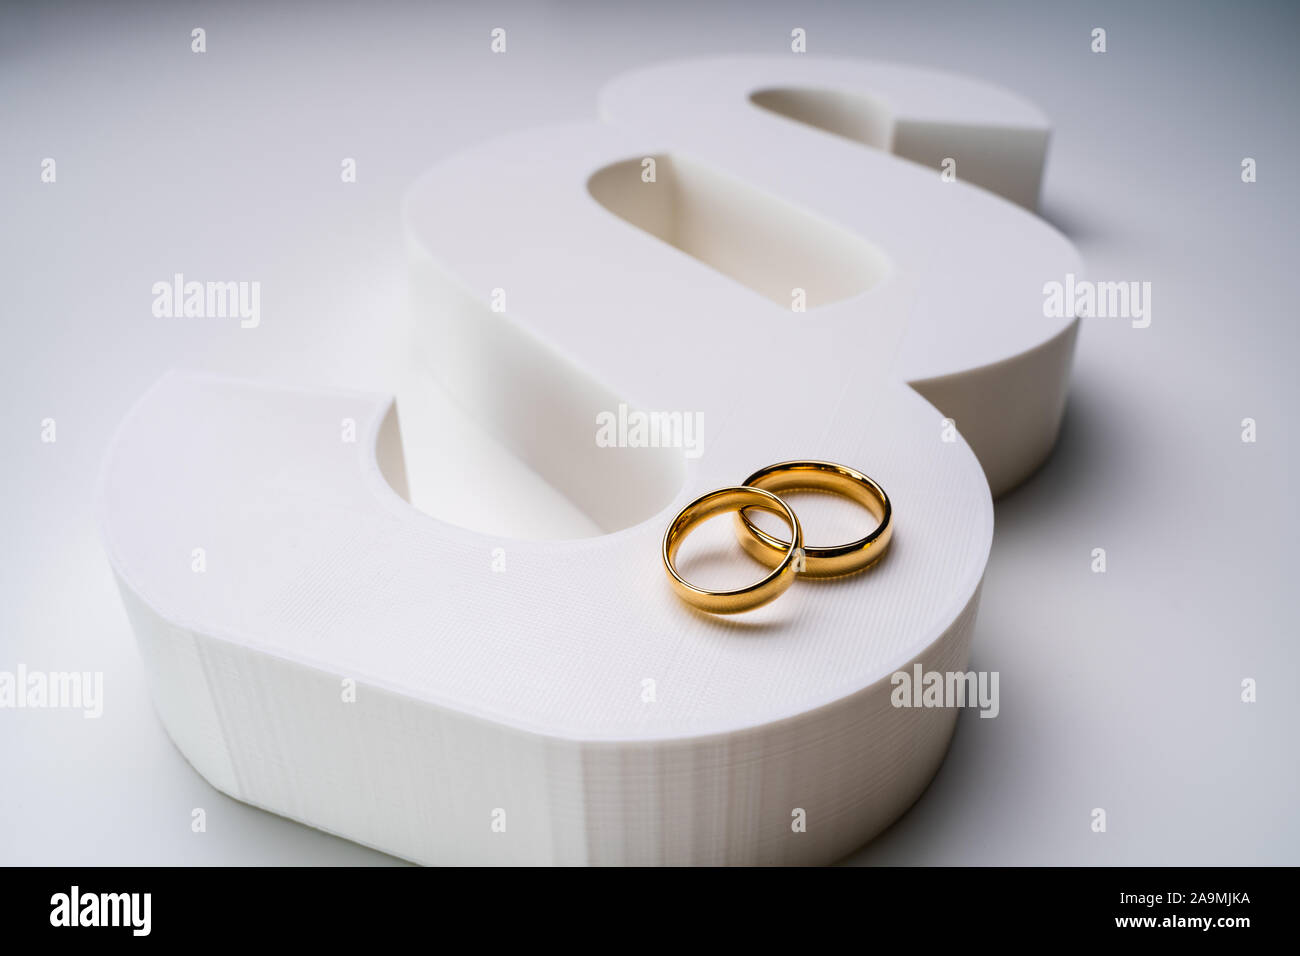 White Paragraph Sign And Golden Wedding Ring Showing Marriage And Law Concept Stock Photo